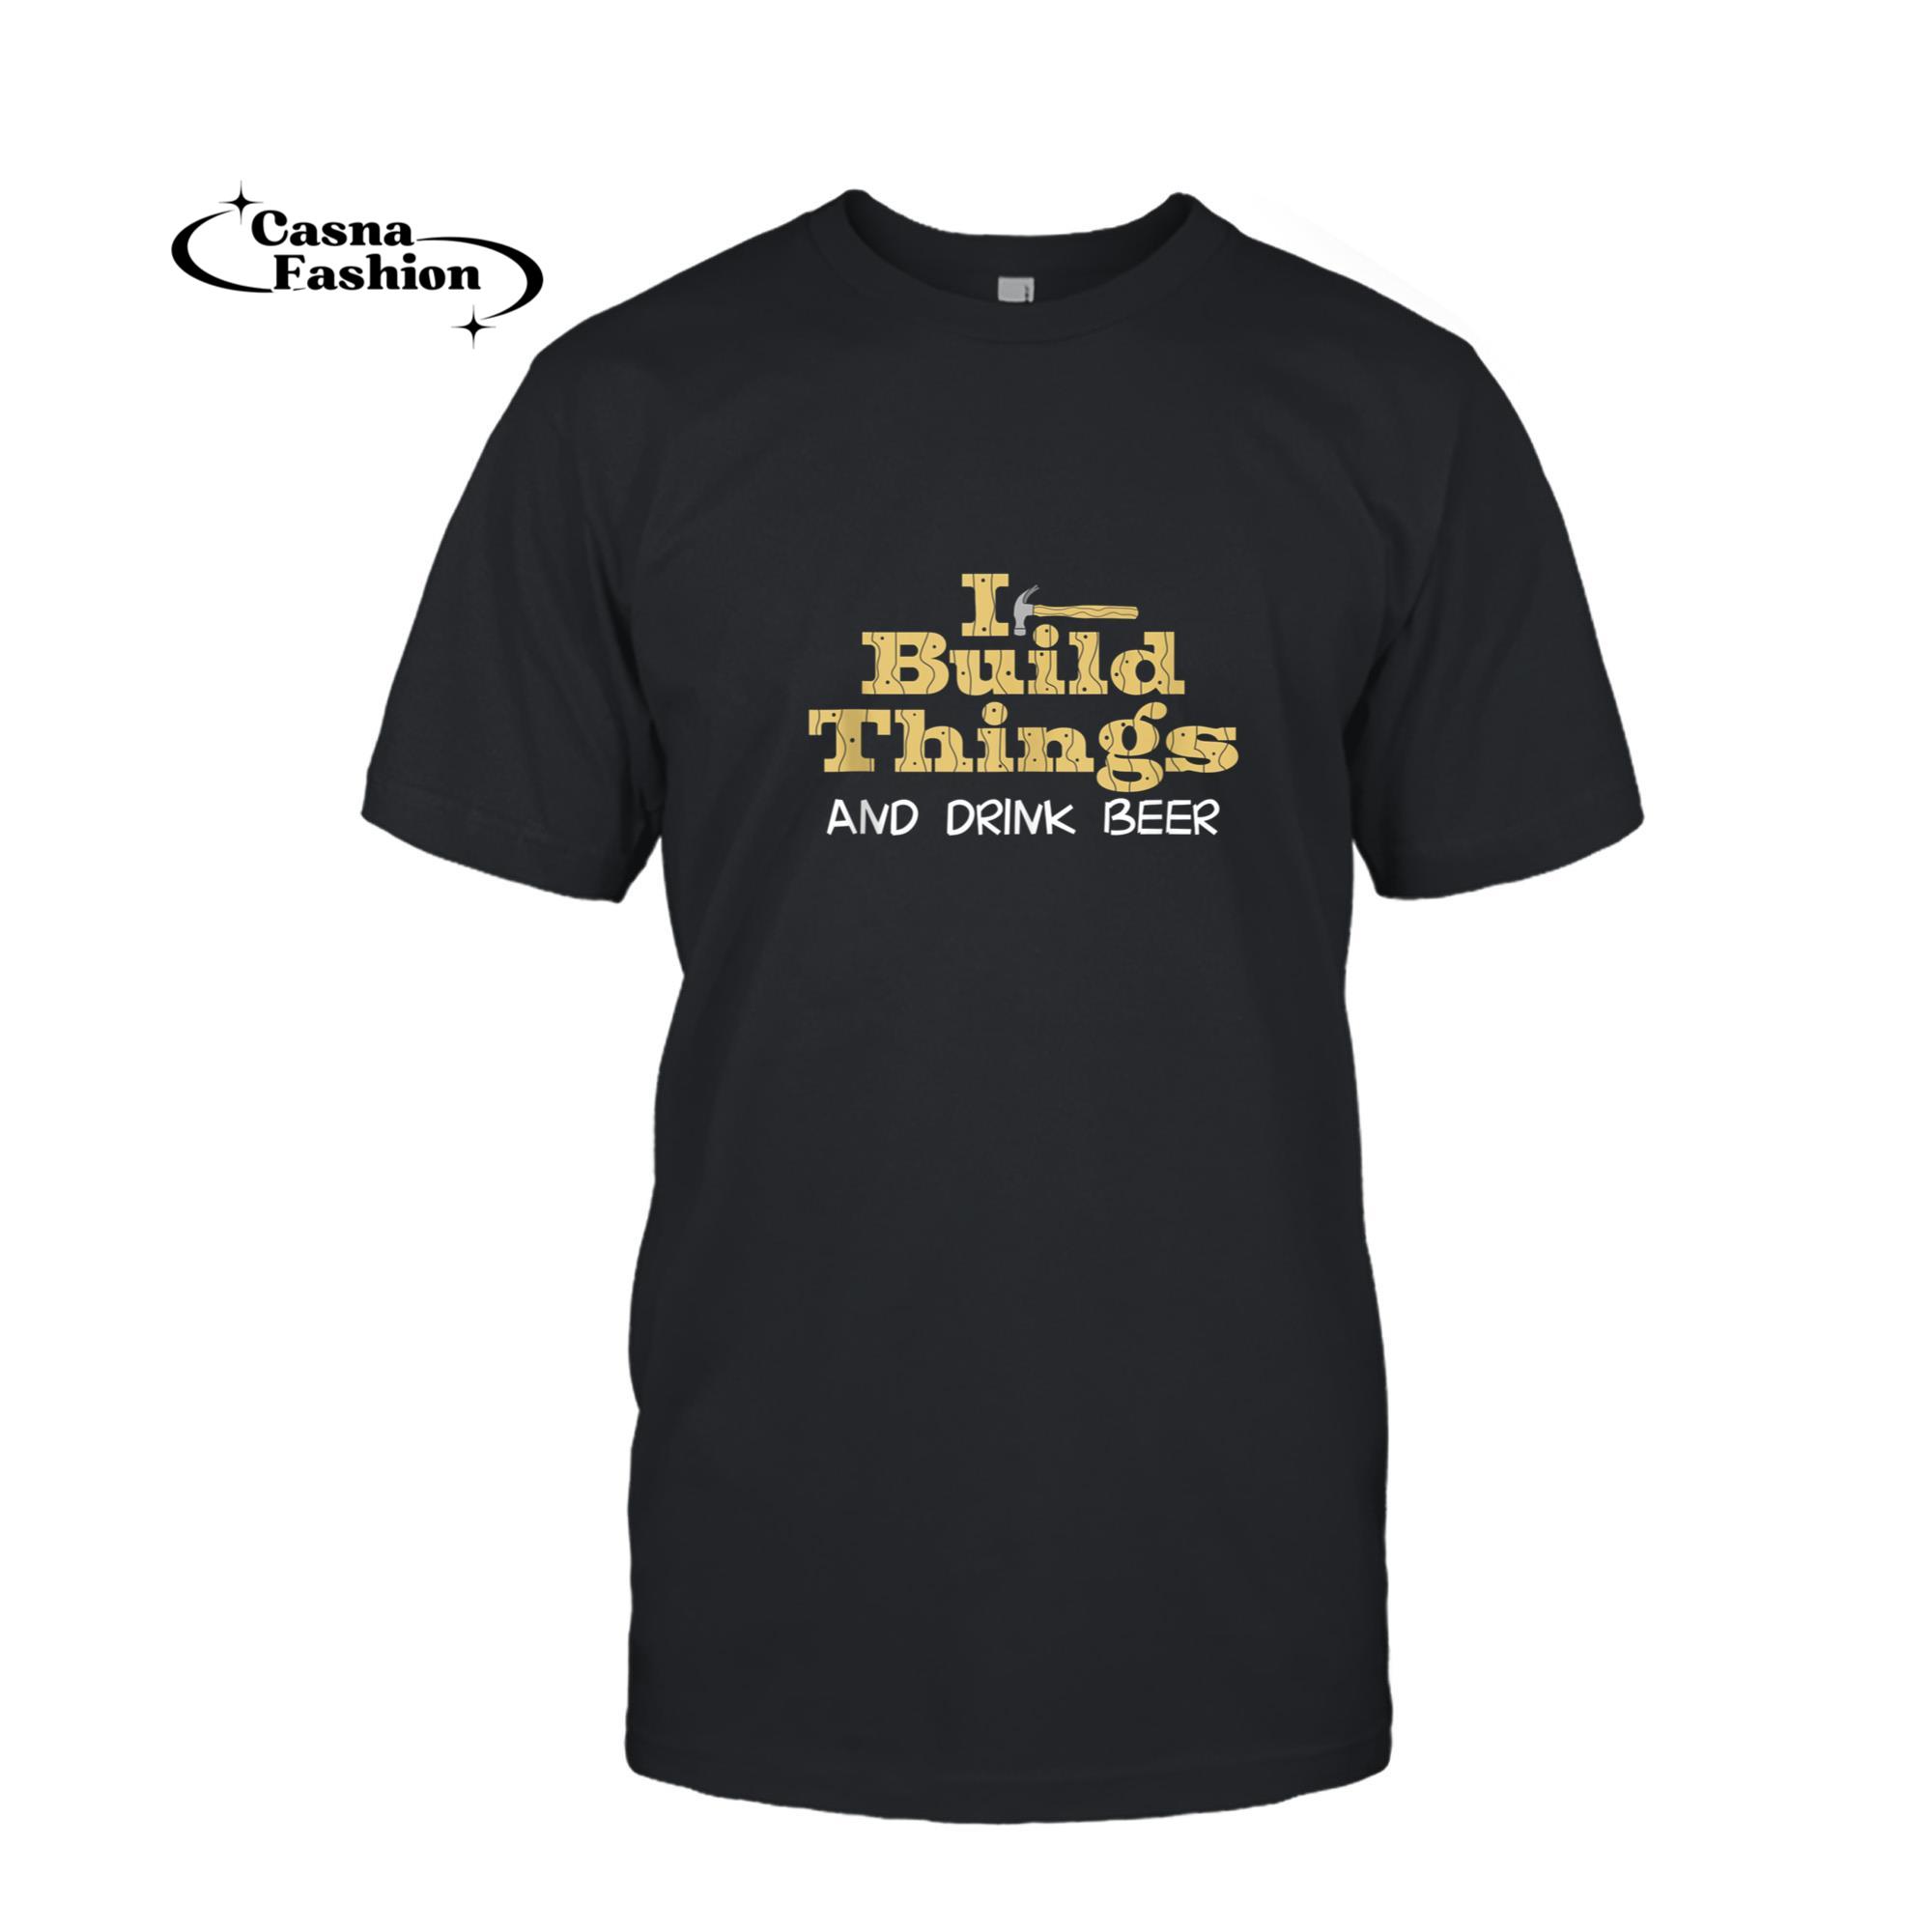 casnafashion_T-shirt_I Build Things And Drink Beer Funny Woodworker Construction Tank Top_T-shirt_Black